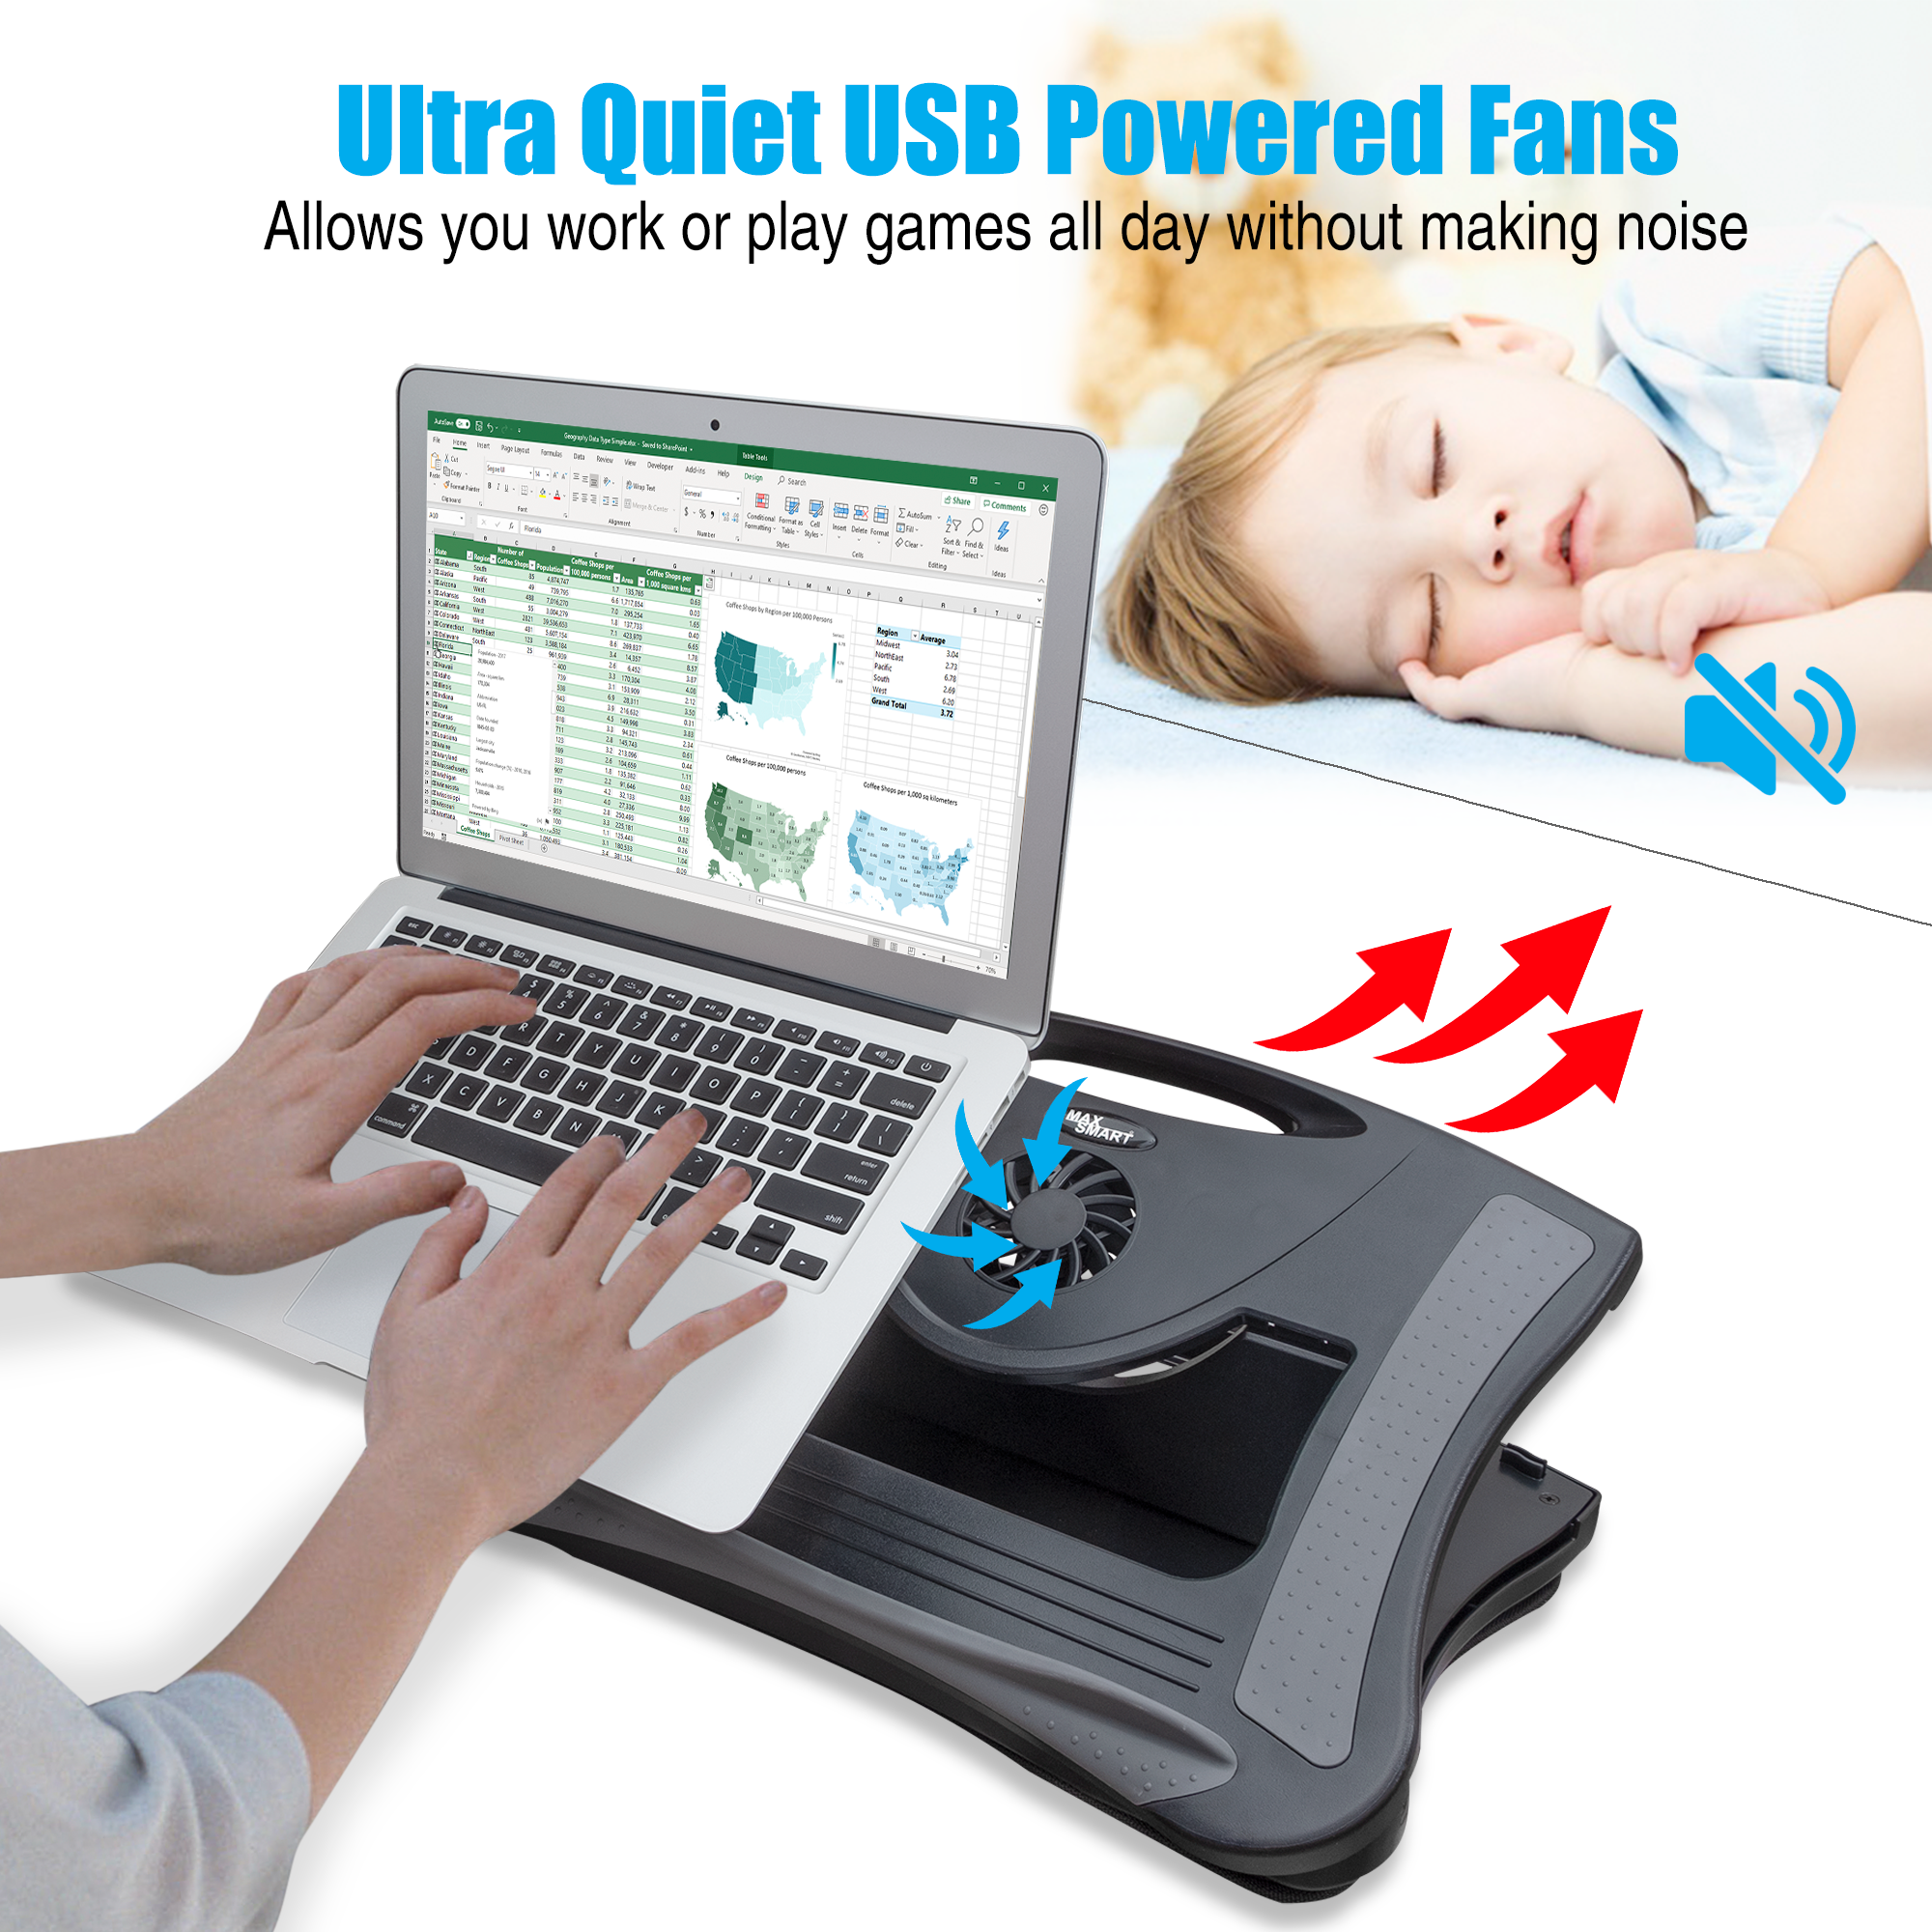 MAX SMART Laptop Lap Desk with Adjustable Angles, Detachable Mouse Pad, USB Fan, and Cushion - image 4 of 7